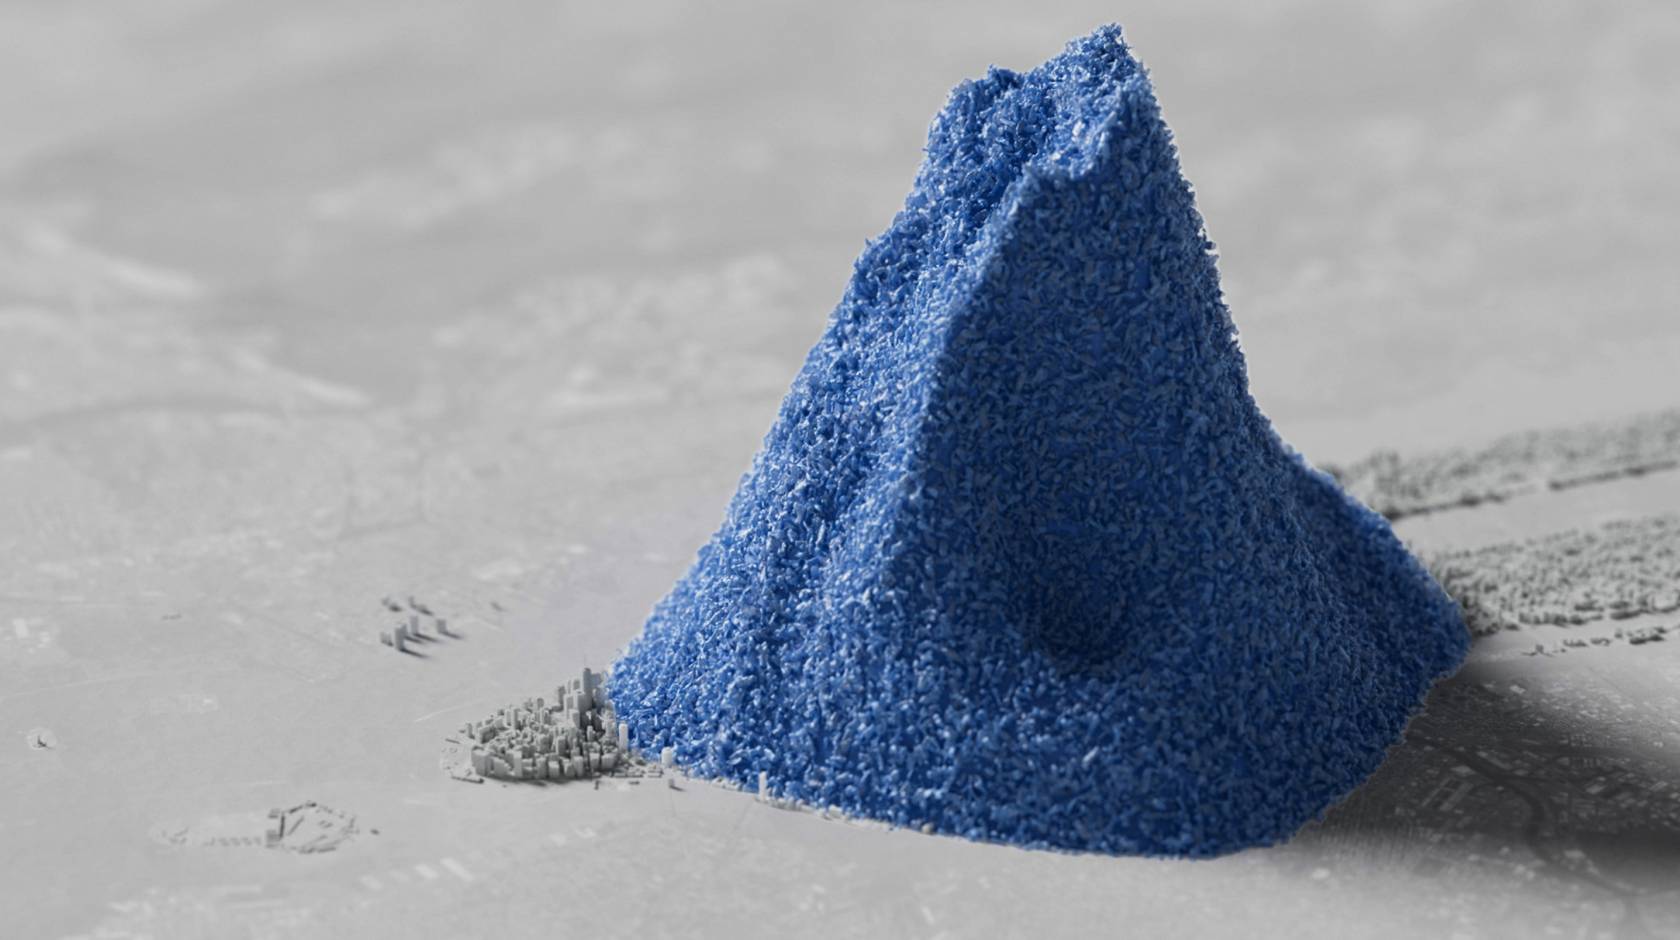 3D-looking illustration of a pile of blue plastic beads dwarfing a scale model of Manhattan